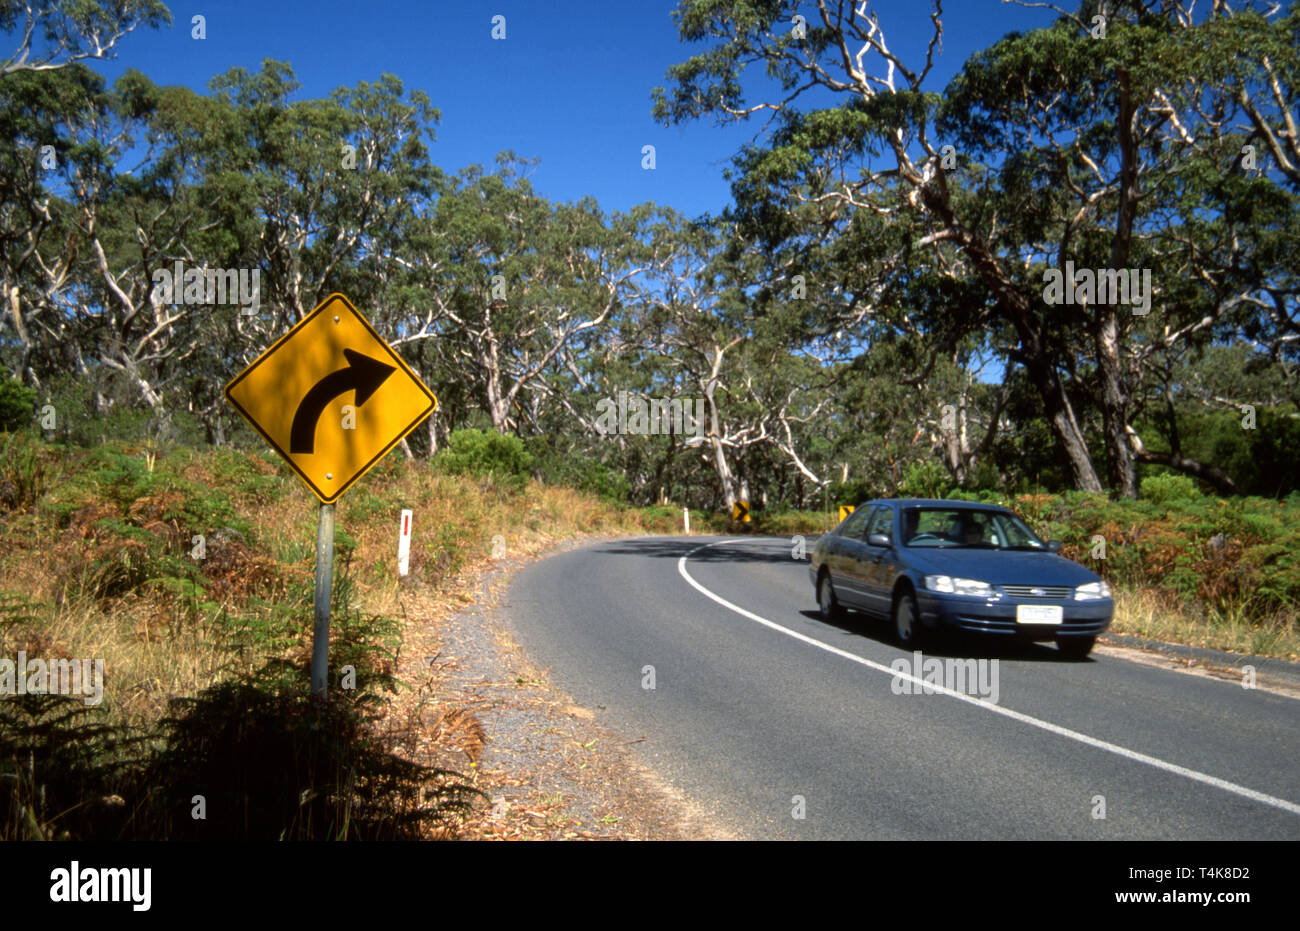 CAR TRAVELLING ALONG COUNTRY ROAD AND ROAD SIGN INDICATING TO TRAFFIC A BEND IN THE ROAD IS APPROACHING, NEW SOUTH WALES, AUSTRALIA. Stock Photo